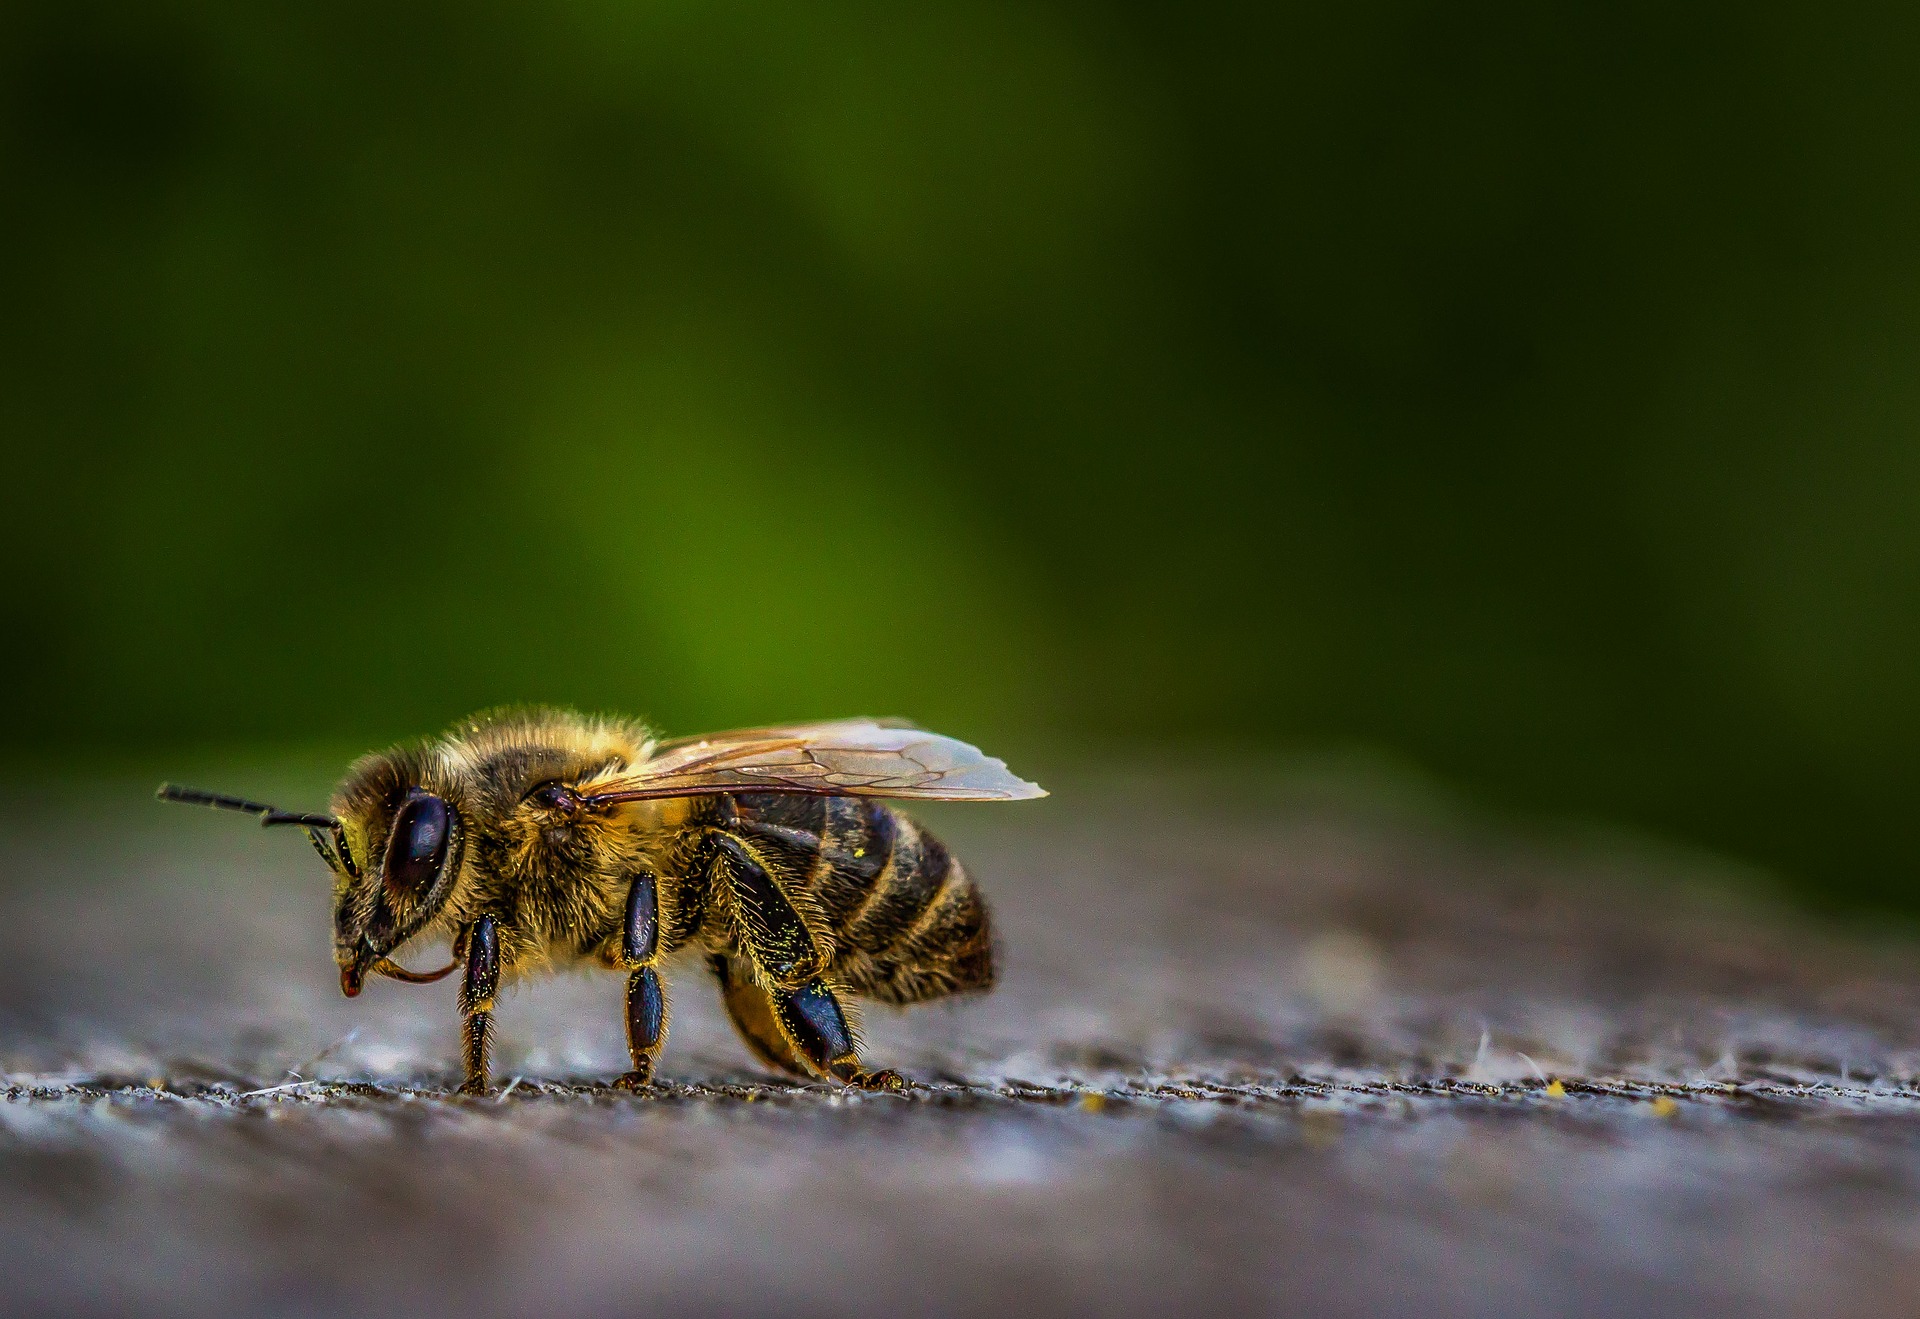 Restriction of Neonicotinoid Uses to Take Effect in 2021